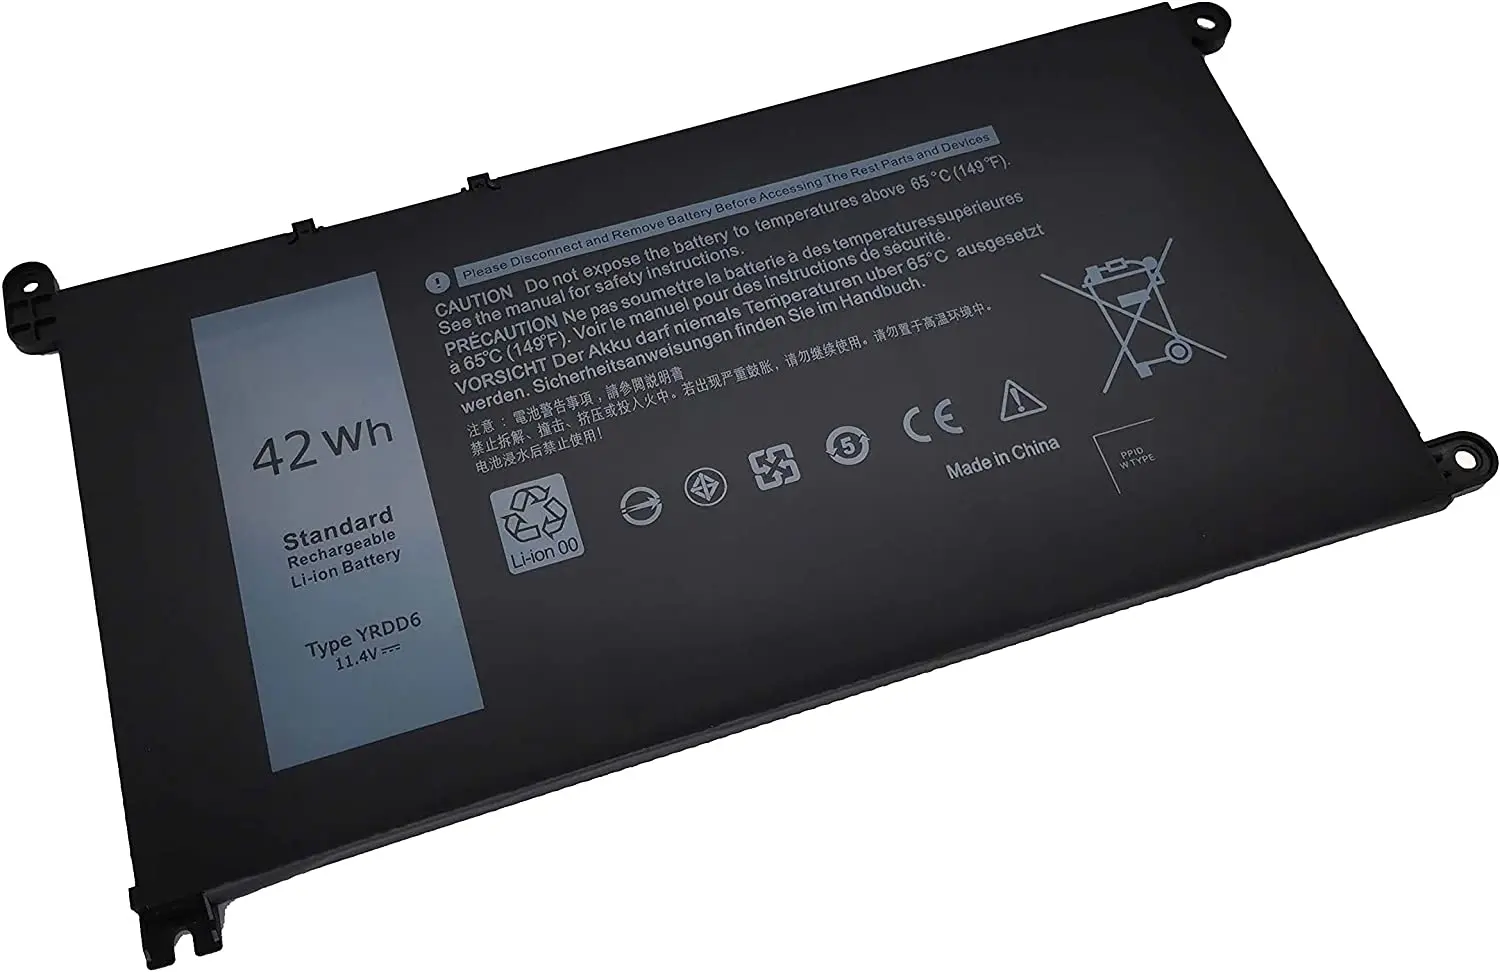  42wh 3-cells Yrdd6 Replacement Battery For Dell Inspiron 5585 5590  5593 5594 5598 7586 Lithium Ion Battery - Buy For Dell 5585 Laptop Battery, Yrdd6,Laptop Lithium Batteries Product on 